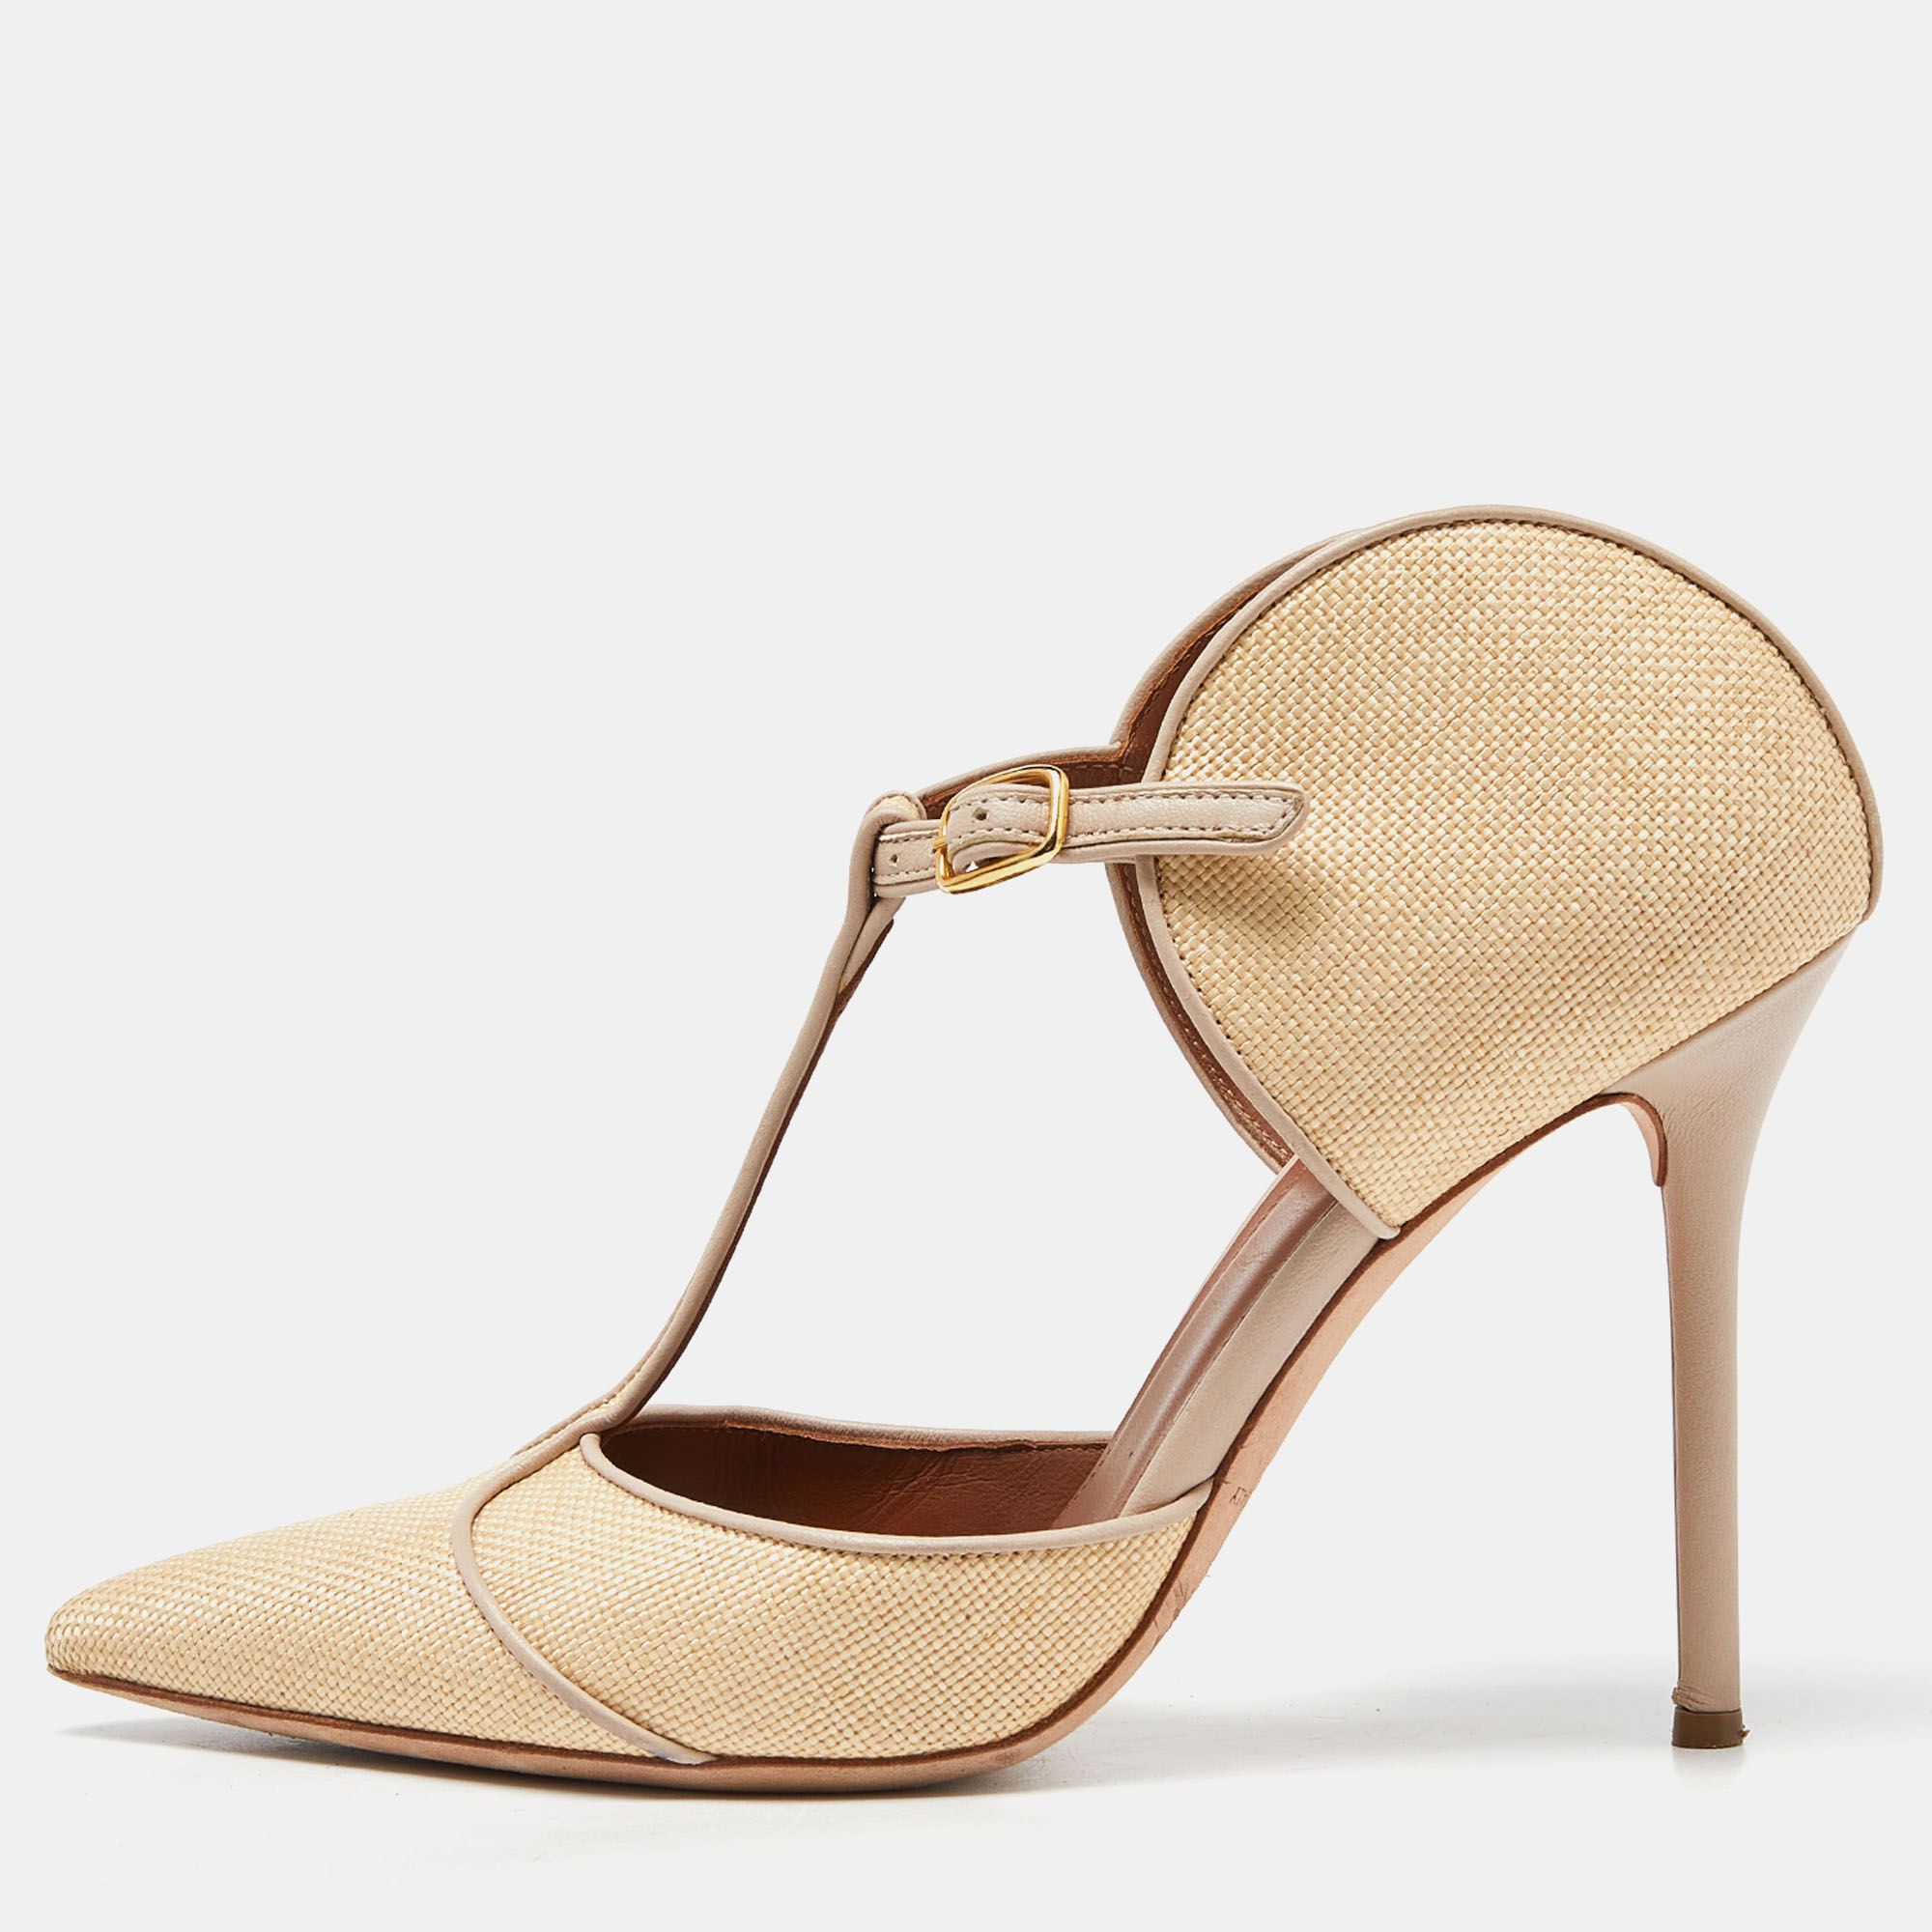 

Malone Souliers Cream/Beige Woven Raffia and Leather Imogen Mule Sandals Size